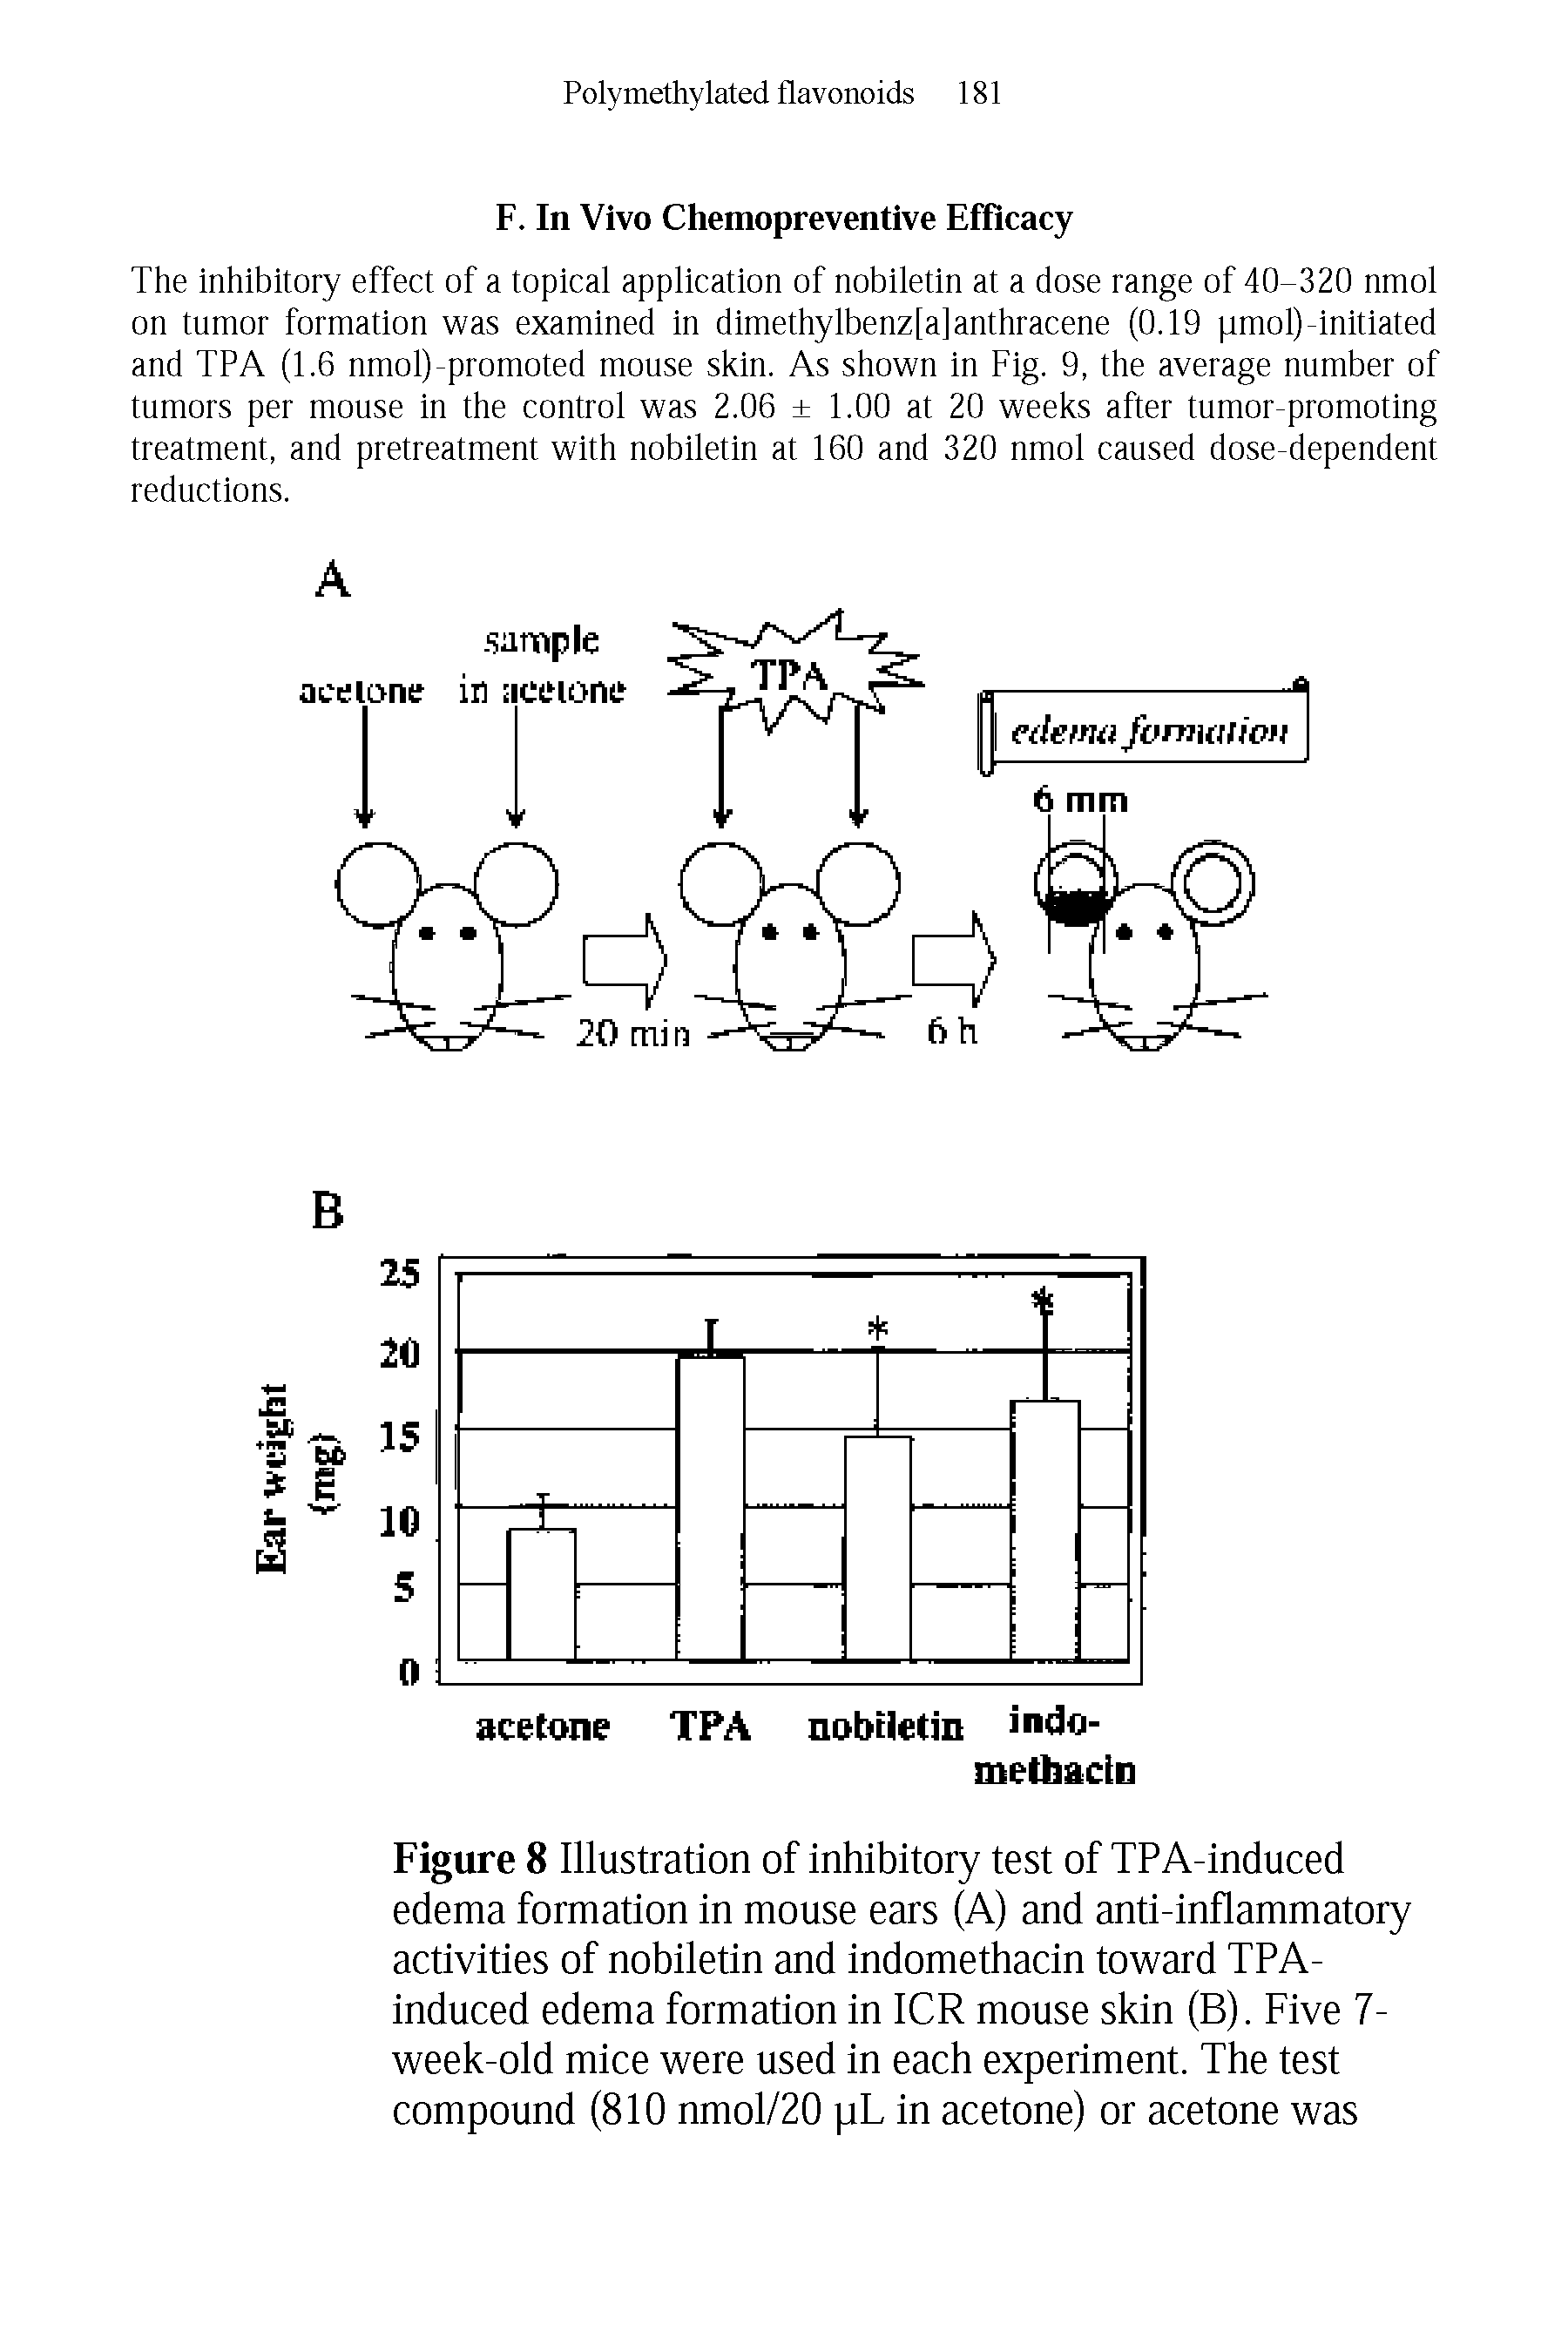 Figure 8 Illustration of inhibitory test of TPA-induced edema formation in mouse ears (A) and anti-inflammatory activities of nobiletin and indomethacin toward TPA-induced edema formation in ICR mouse skin (B). Five 7-week-old mice were used in each experiment. The test compound (810 nmol/20 pL in acetone) or acetone was...